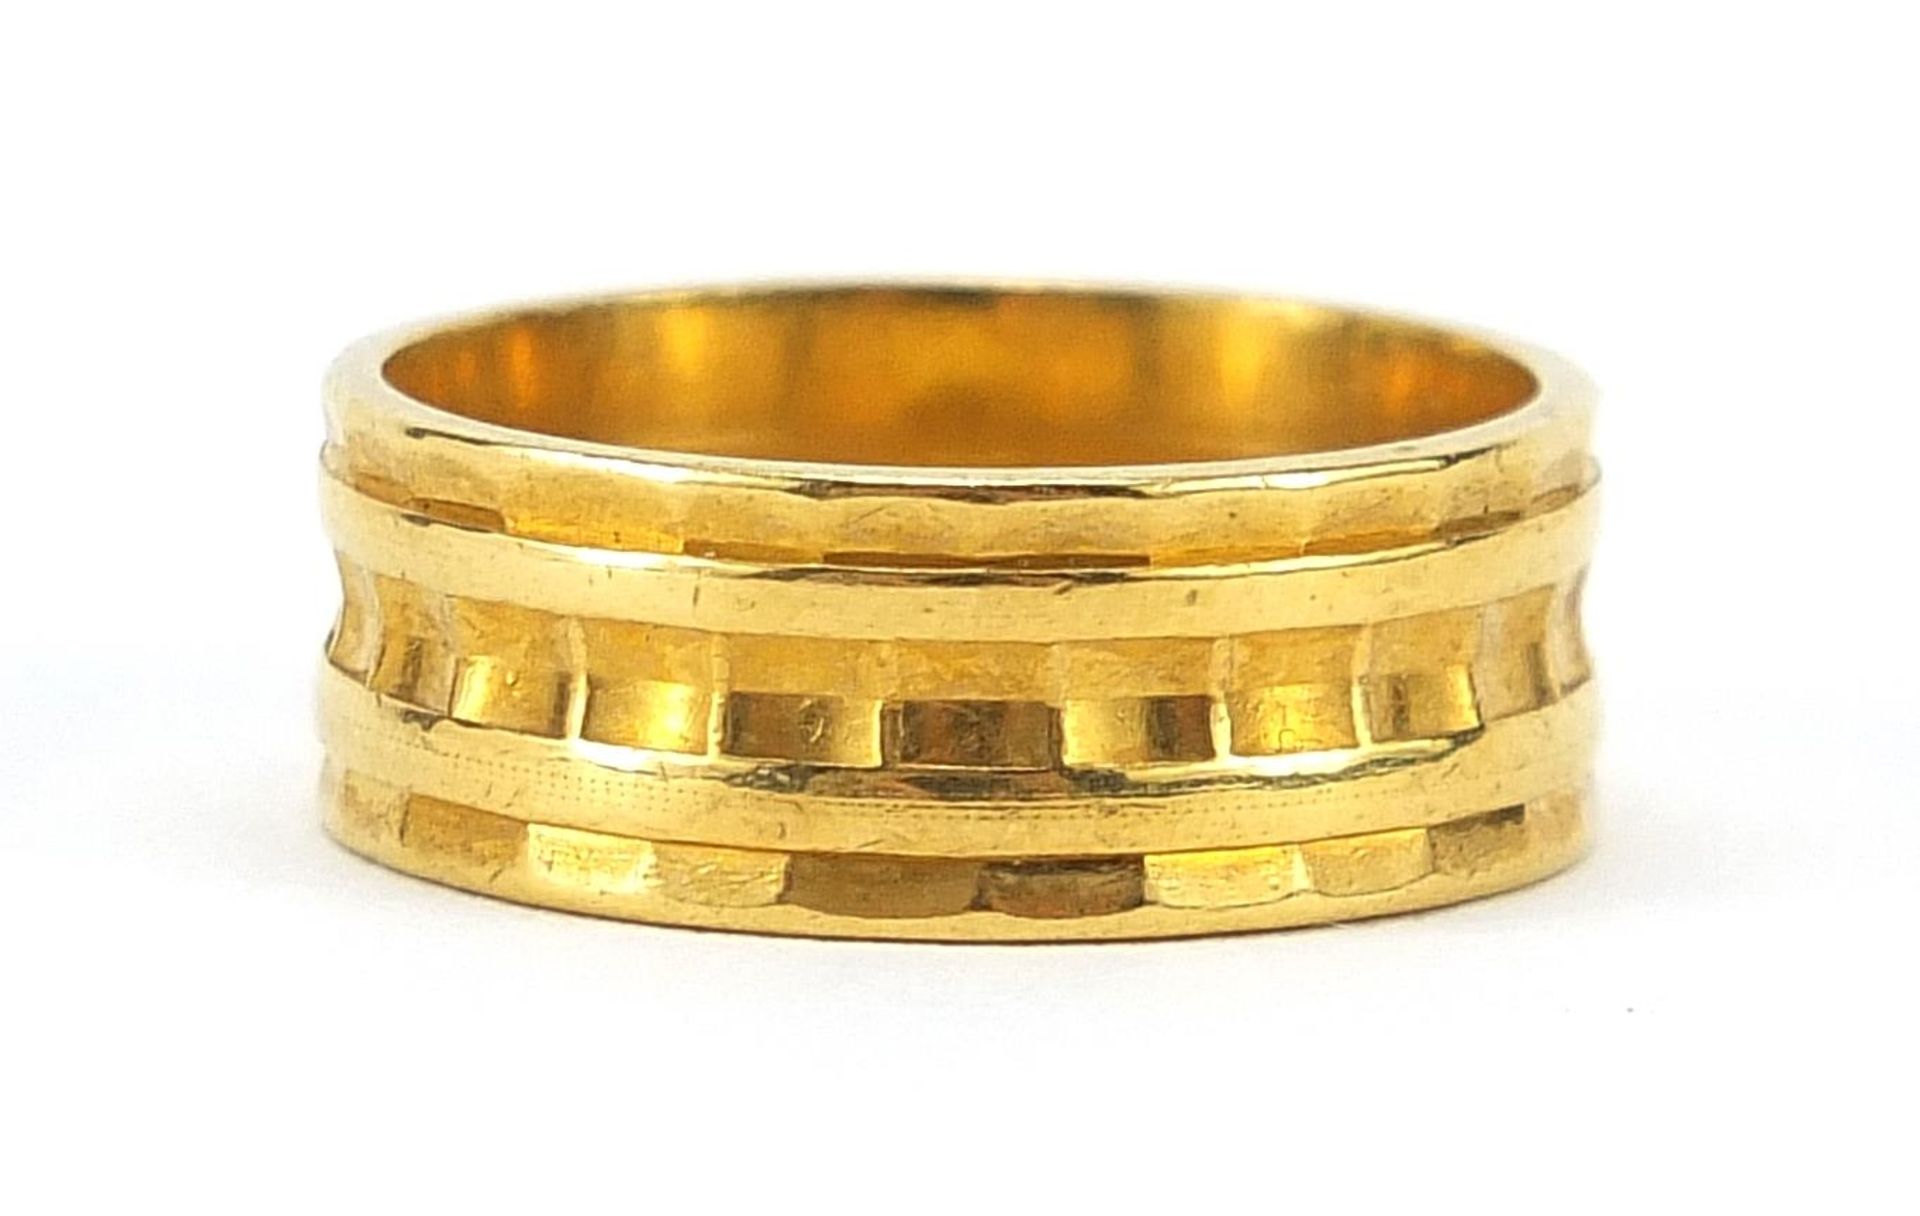 22ct gold wedding band, London 1963, size K/L, 6.0g this lot is sold without buyer's premium - Image 2 of 3